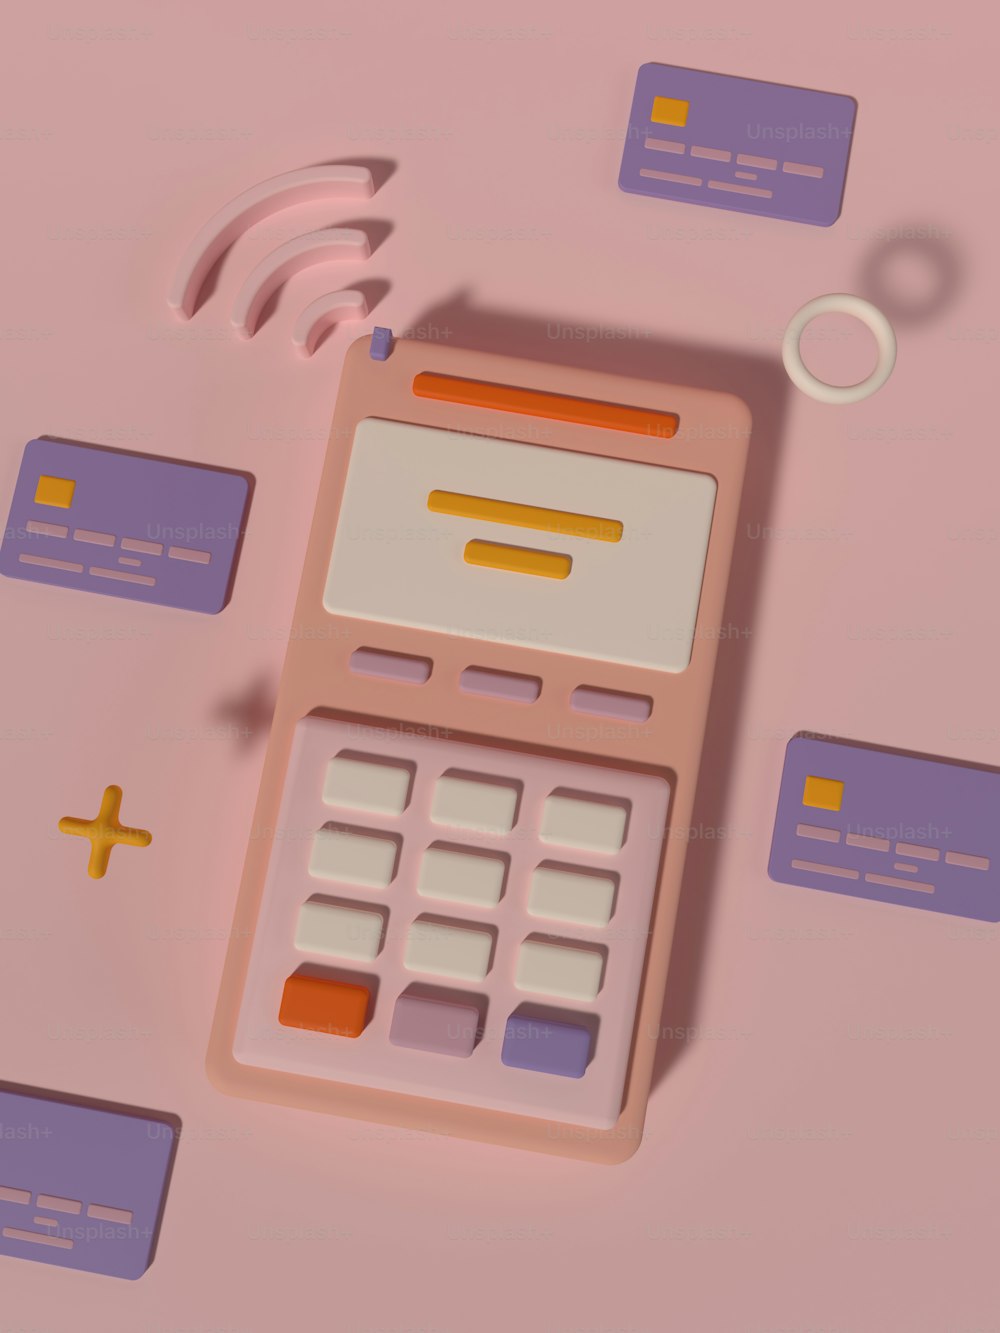 a calculator sitting on top of a pink table